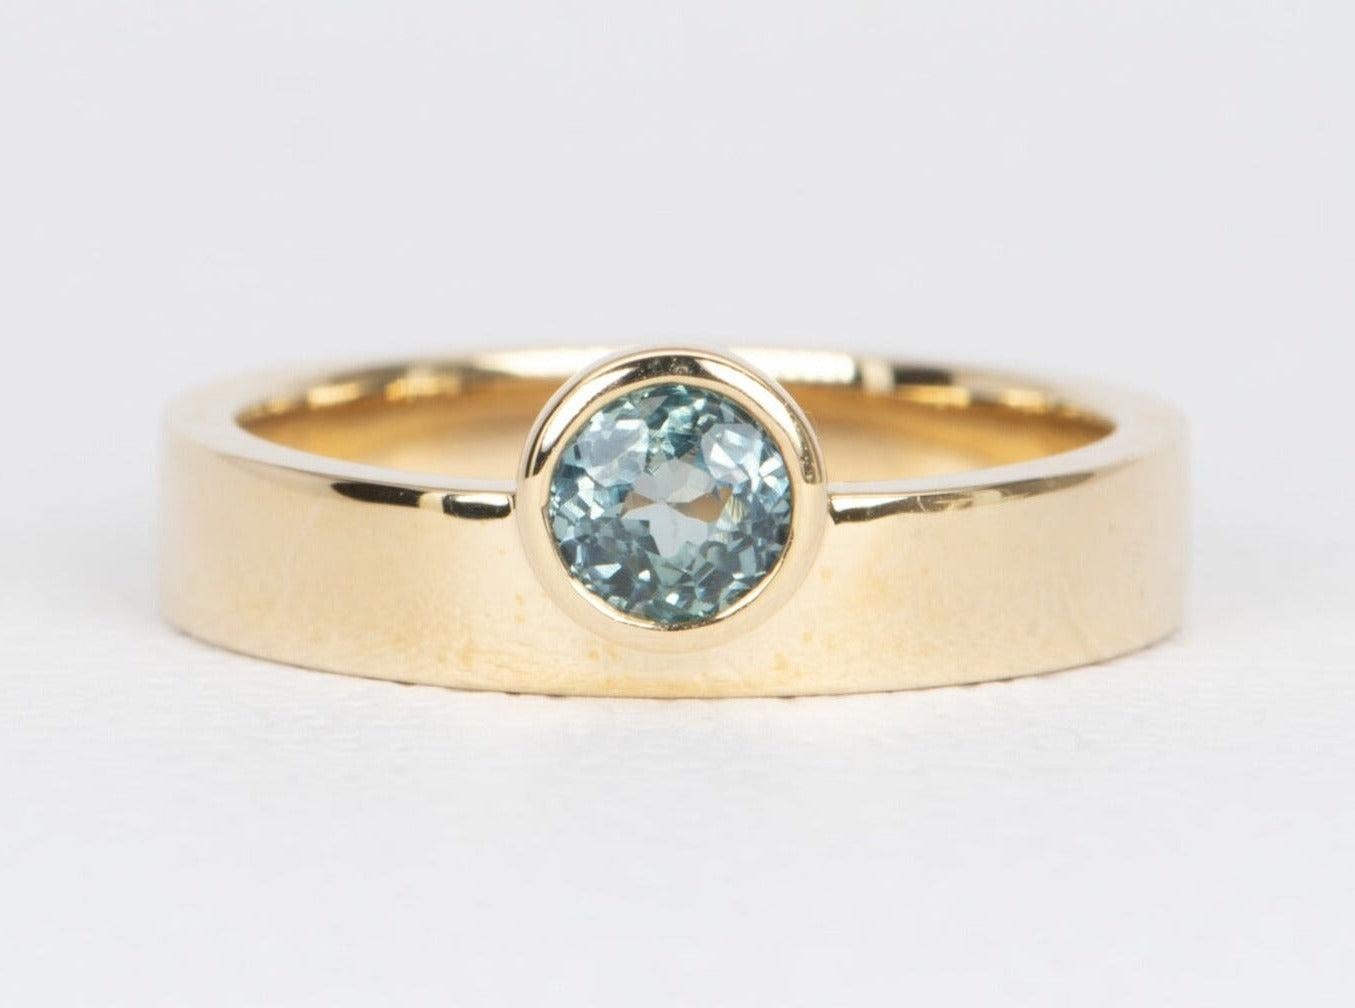 ♥ Solid 14K yellow gold ring set with a round Montana sapphire in a bezel setting
♥ The overall setting measures 7.1 mm in width, 6 mm in length, and sits 4.3 mm tall from the finger

♥ Ring size: US Size 7 (Free resizing up or down one size)
♥ Band